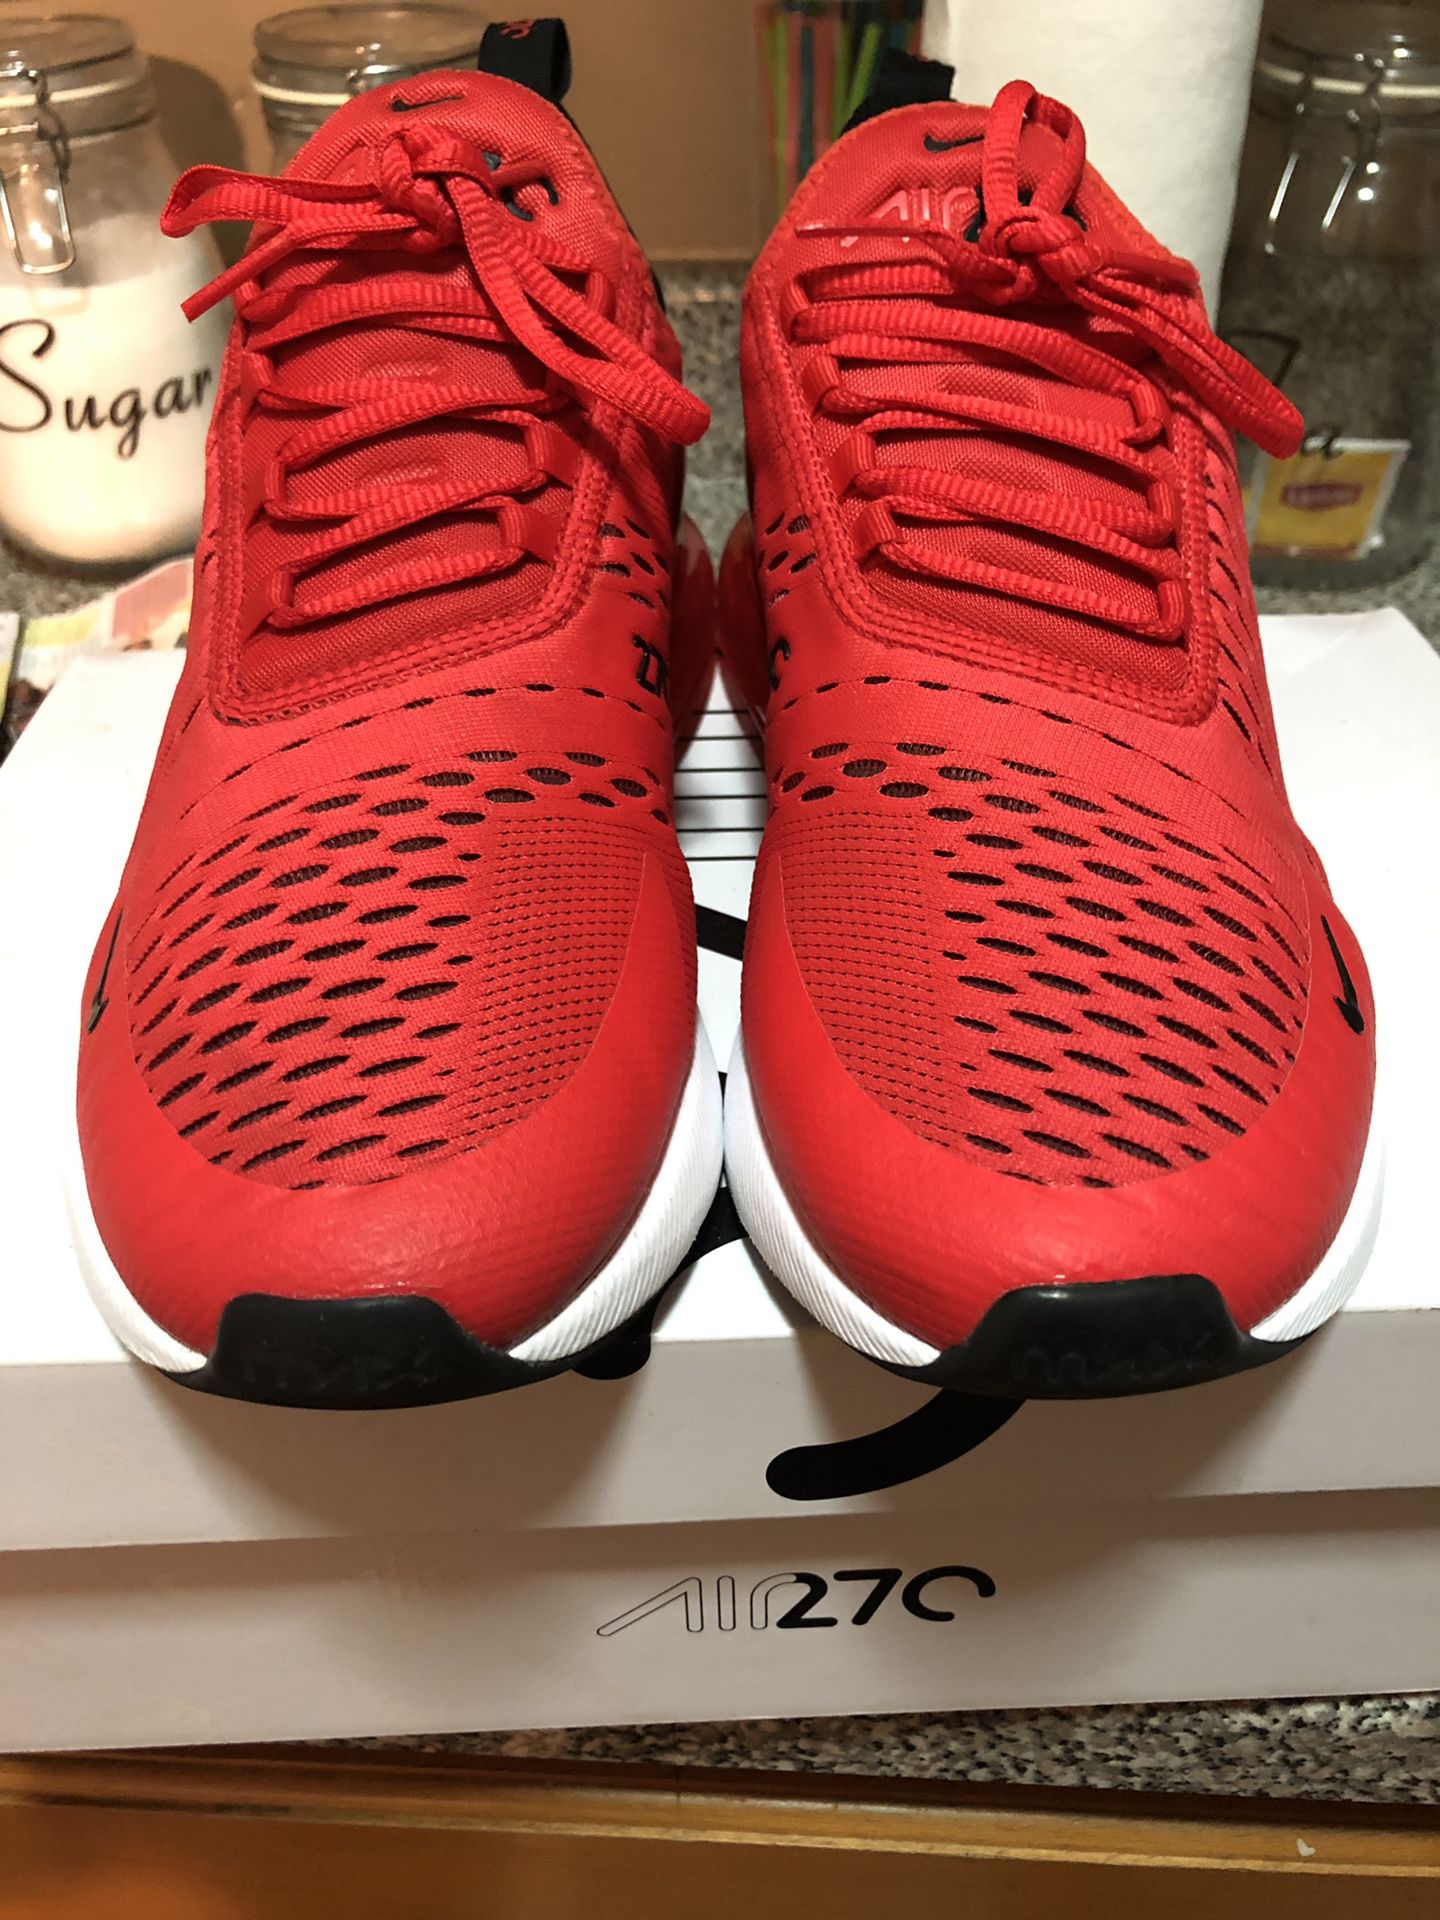 NIKE, 27c for Sale in Bronx, NY - OfferUp